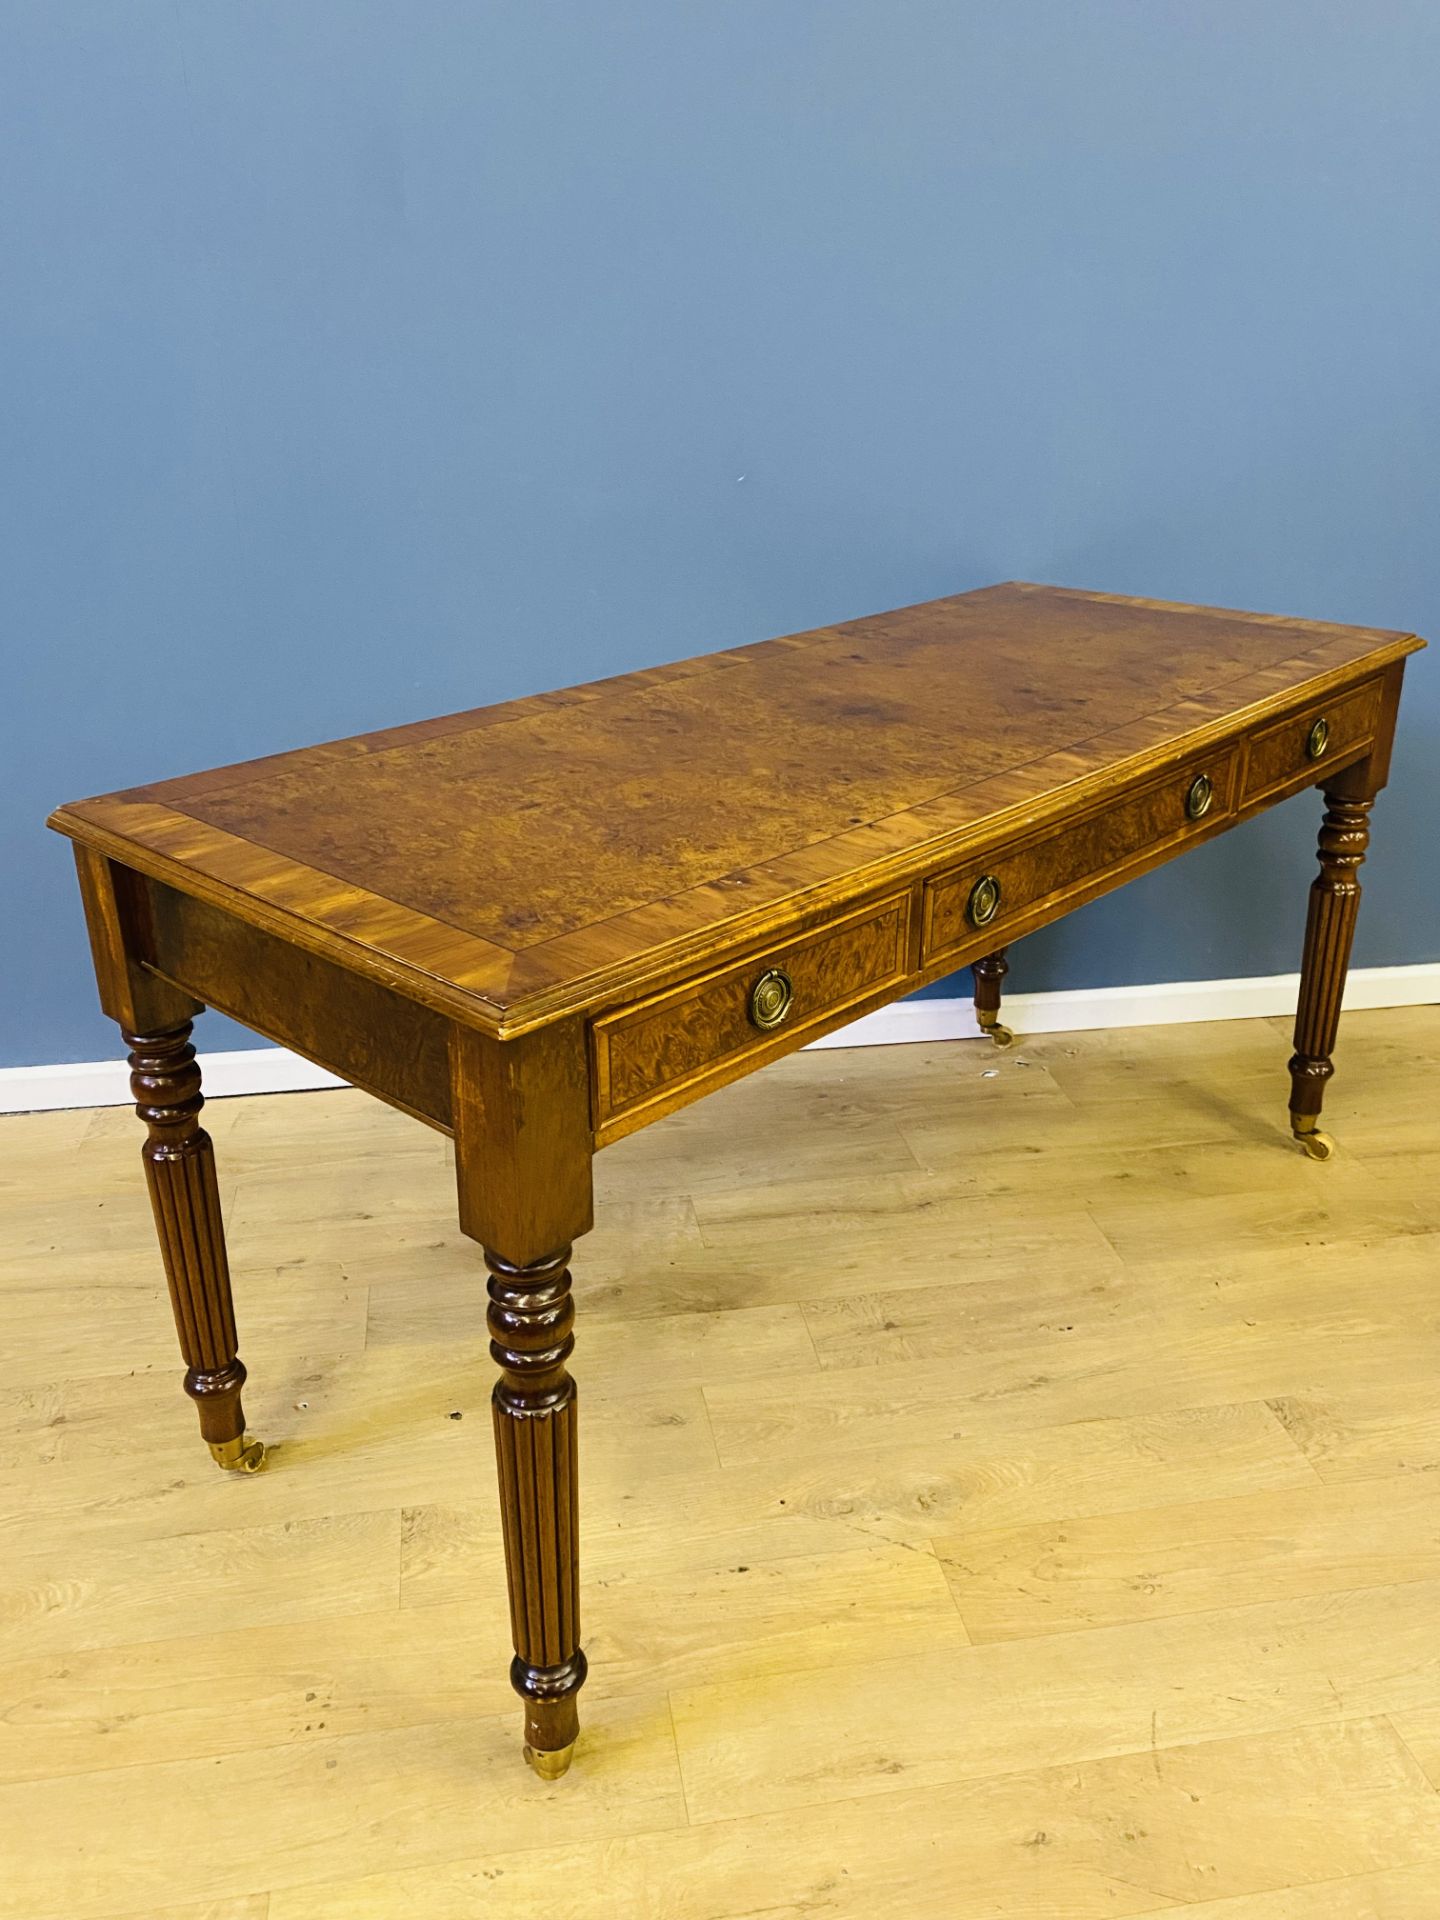 Reproduction burr walnut writing table - Image 6 of 7